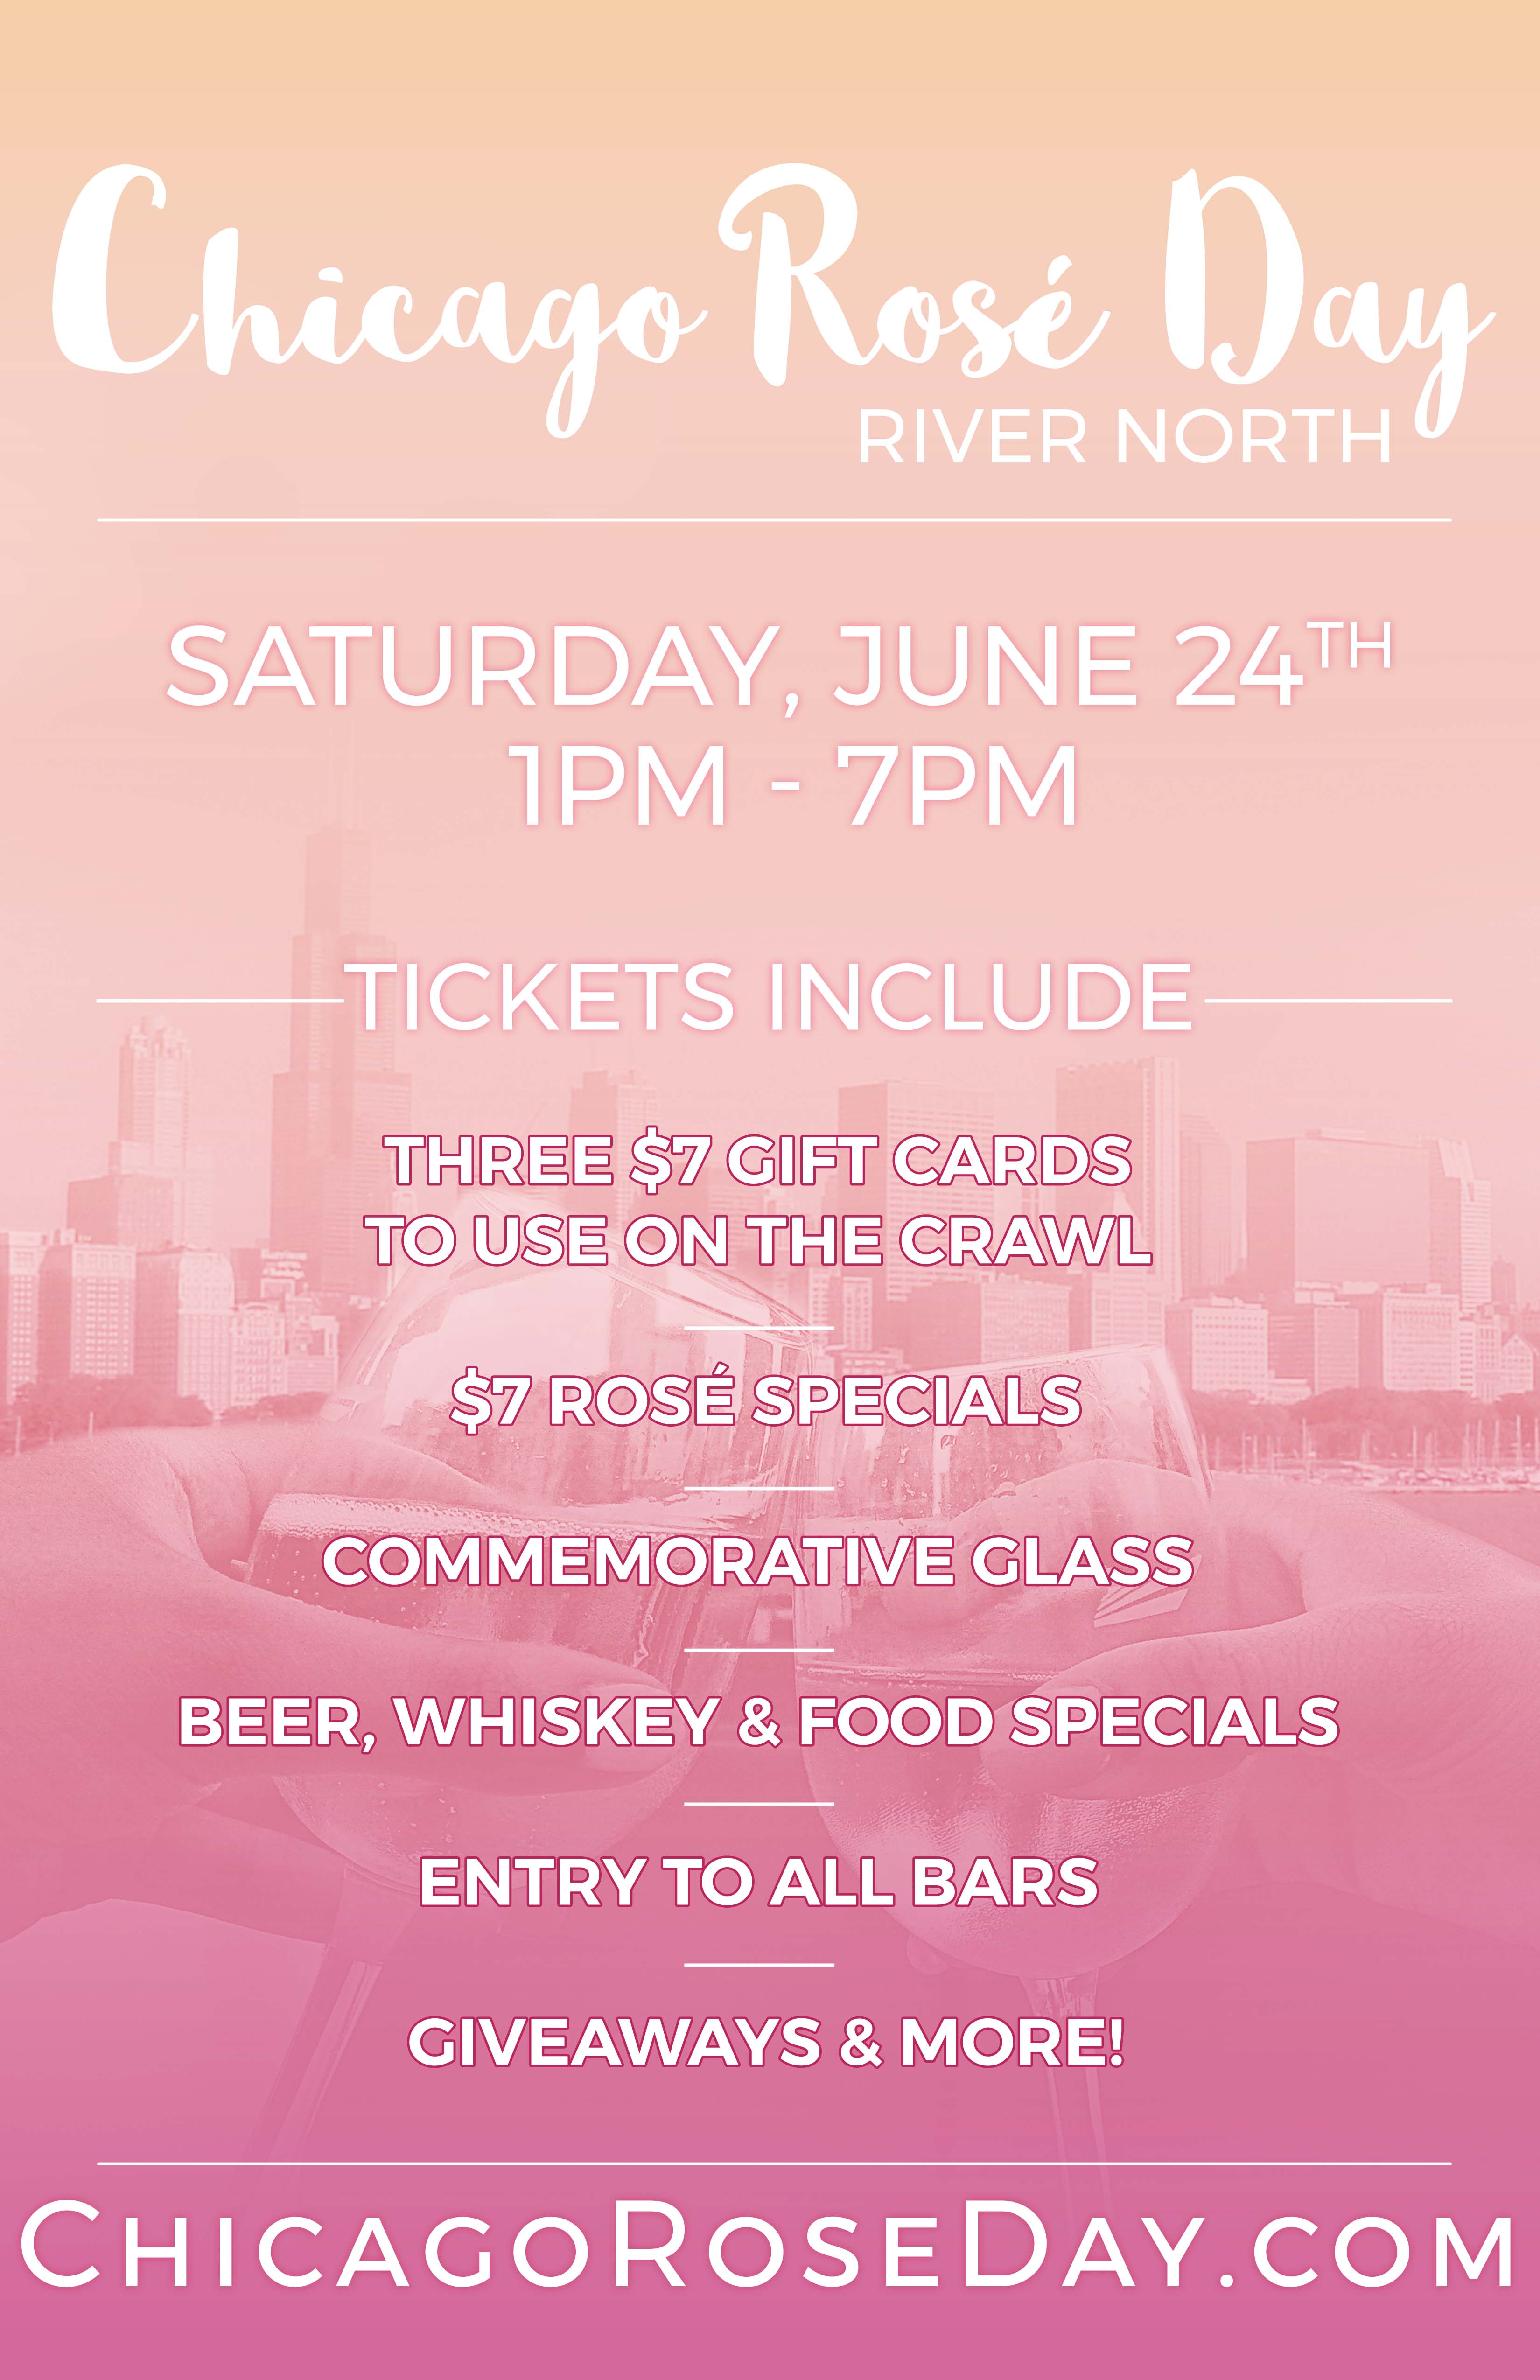 Chicago Rosè Day Party in River North - Tickets include: Three $7 Gift Cards To Use On The Crawl, Access to Amazing Drink Specials Including $7 Rosè, Commemorative Glass, Giveaways & More!